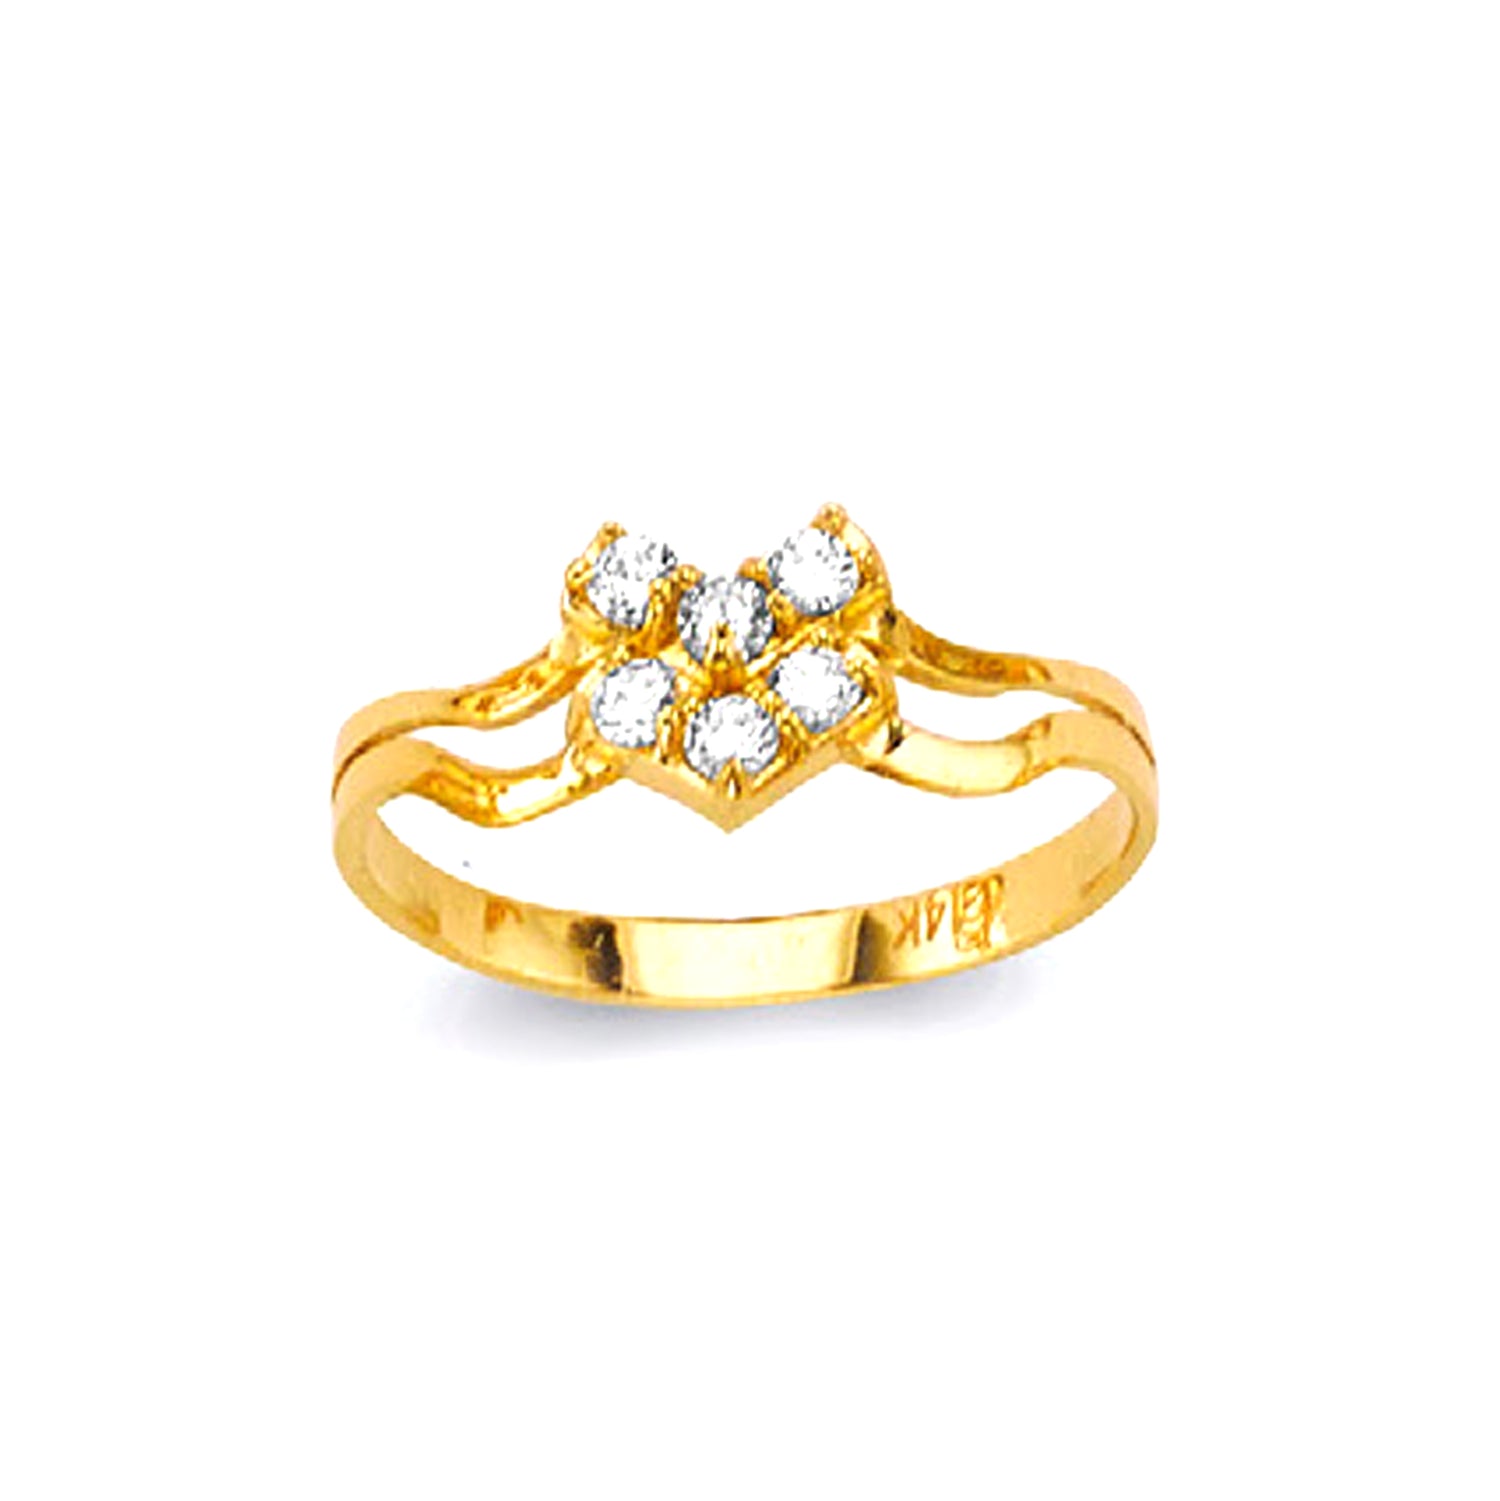 Groovy Tiara Shaped Ring in Solid Gold 